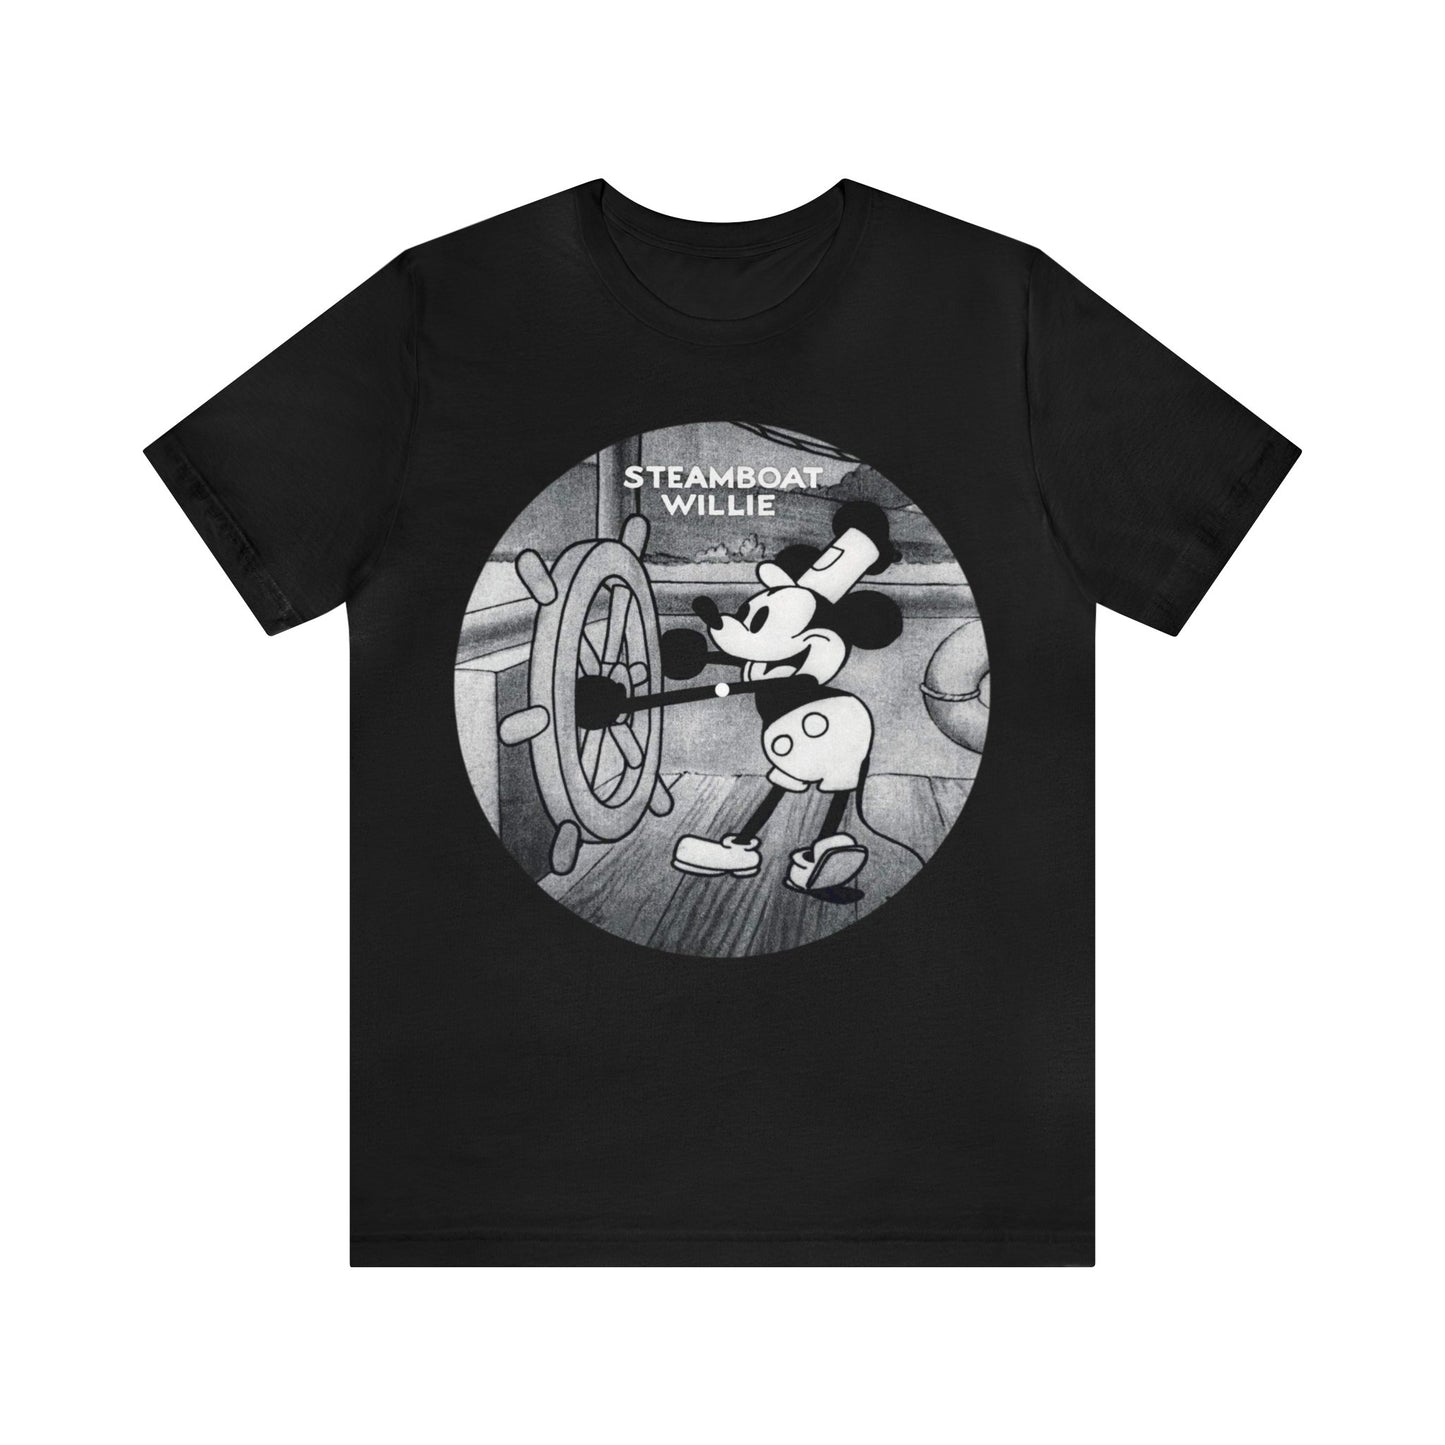 "Steamboat Willie" Unisex Jersey Short Sleeve Tee, Comes in Various Sizes Small to 3XL, Choose Your Color T-shirt